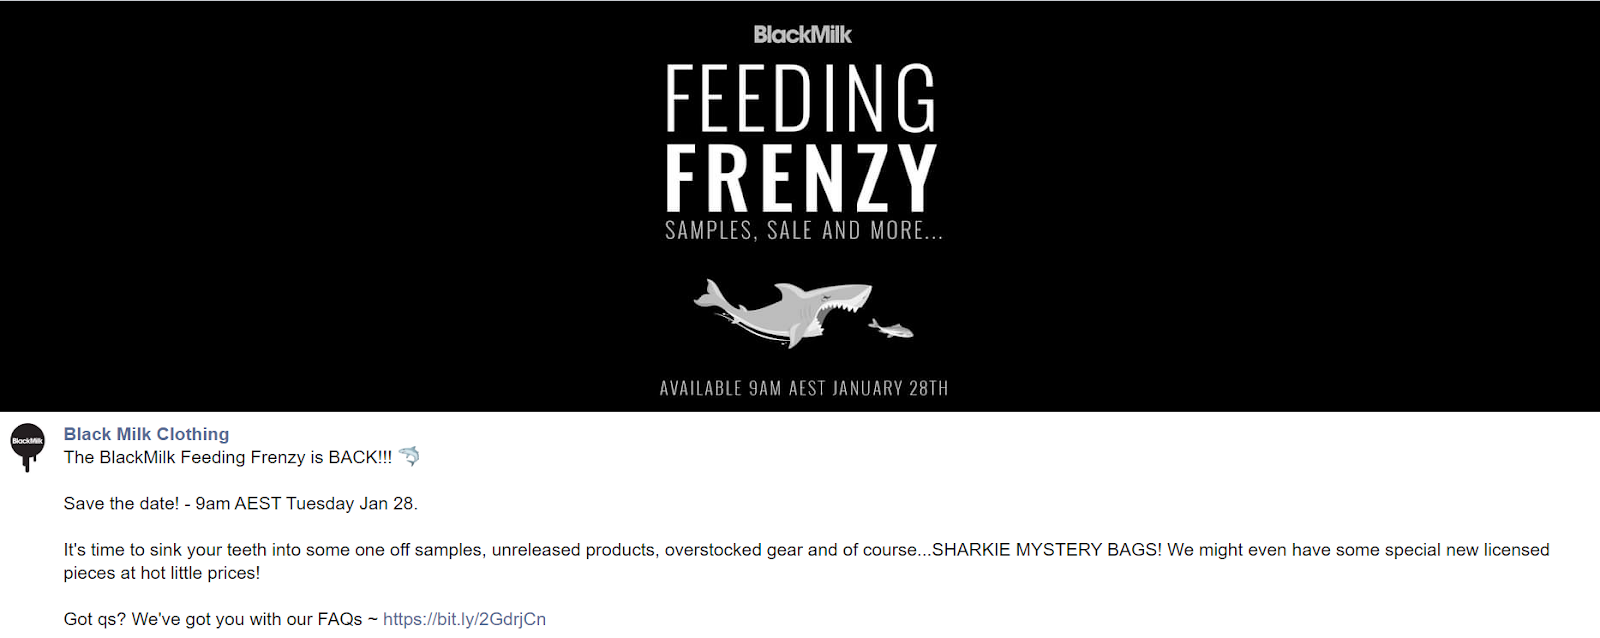 Blackmilk Clothing Facebook post about Feeding Frenzy campaign